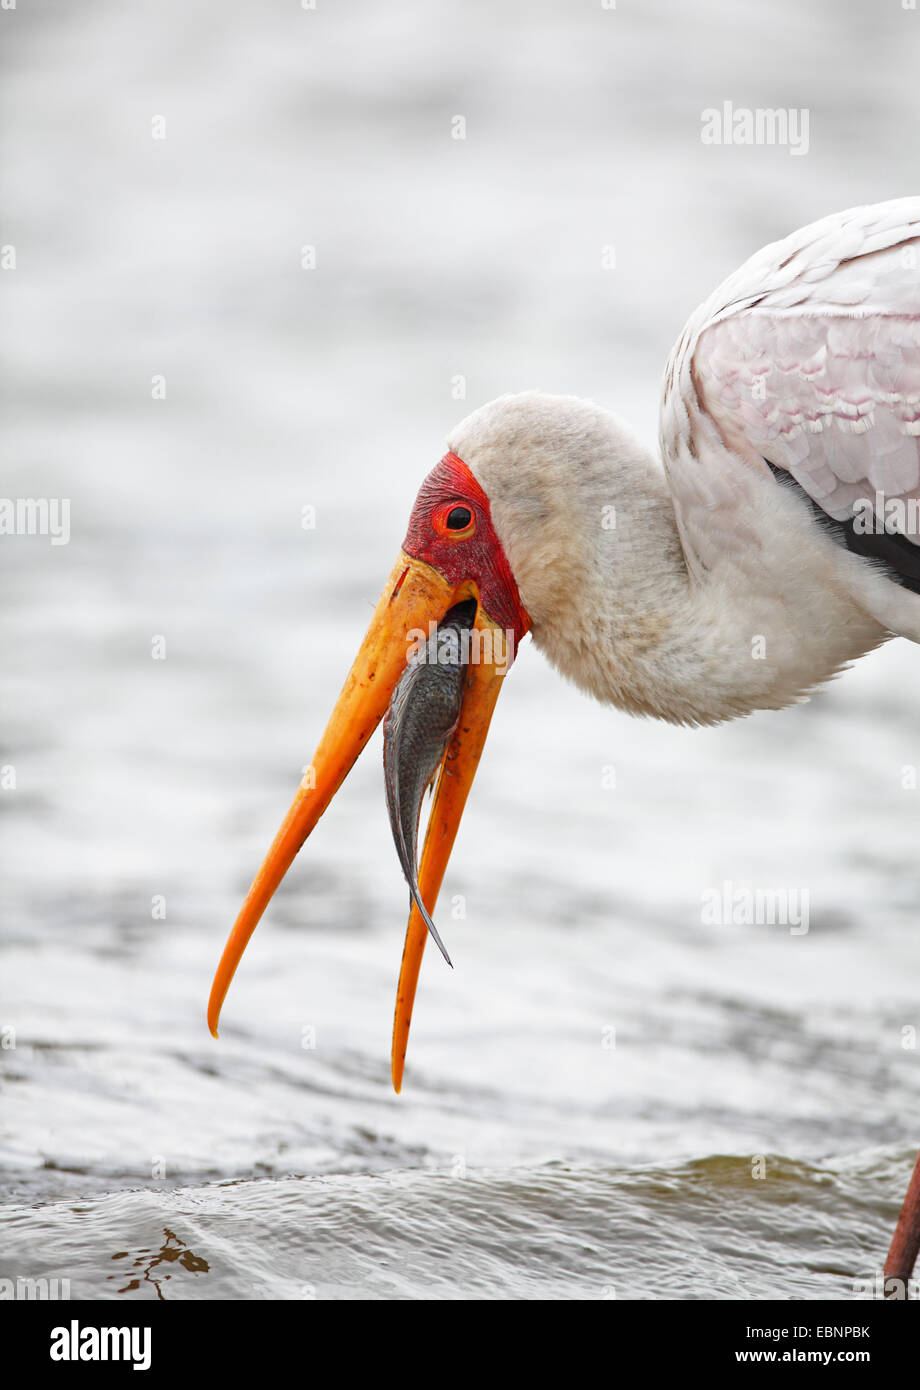 yellow-billed stork (Mycteria ibis), standing in shallow water and eating a fish, South Africa, Kruger National Park Stock Photo